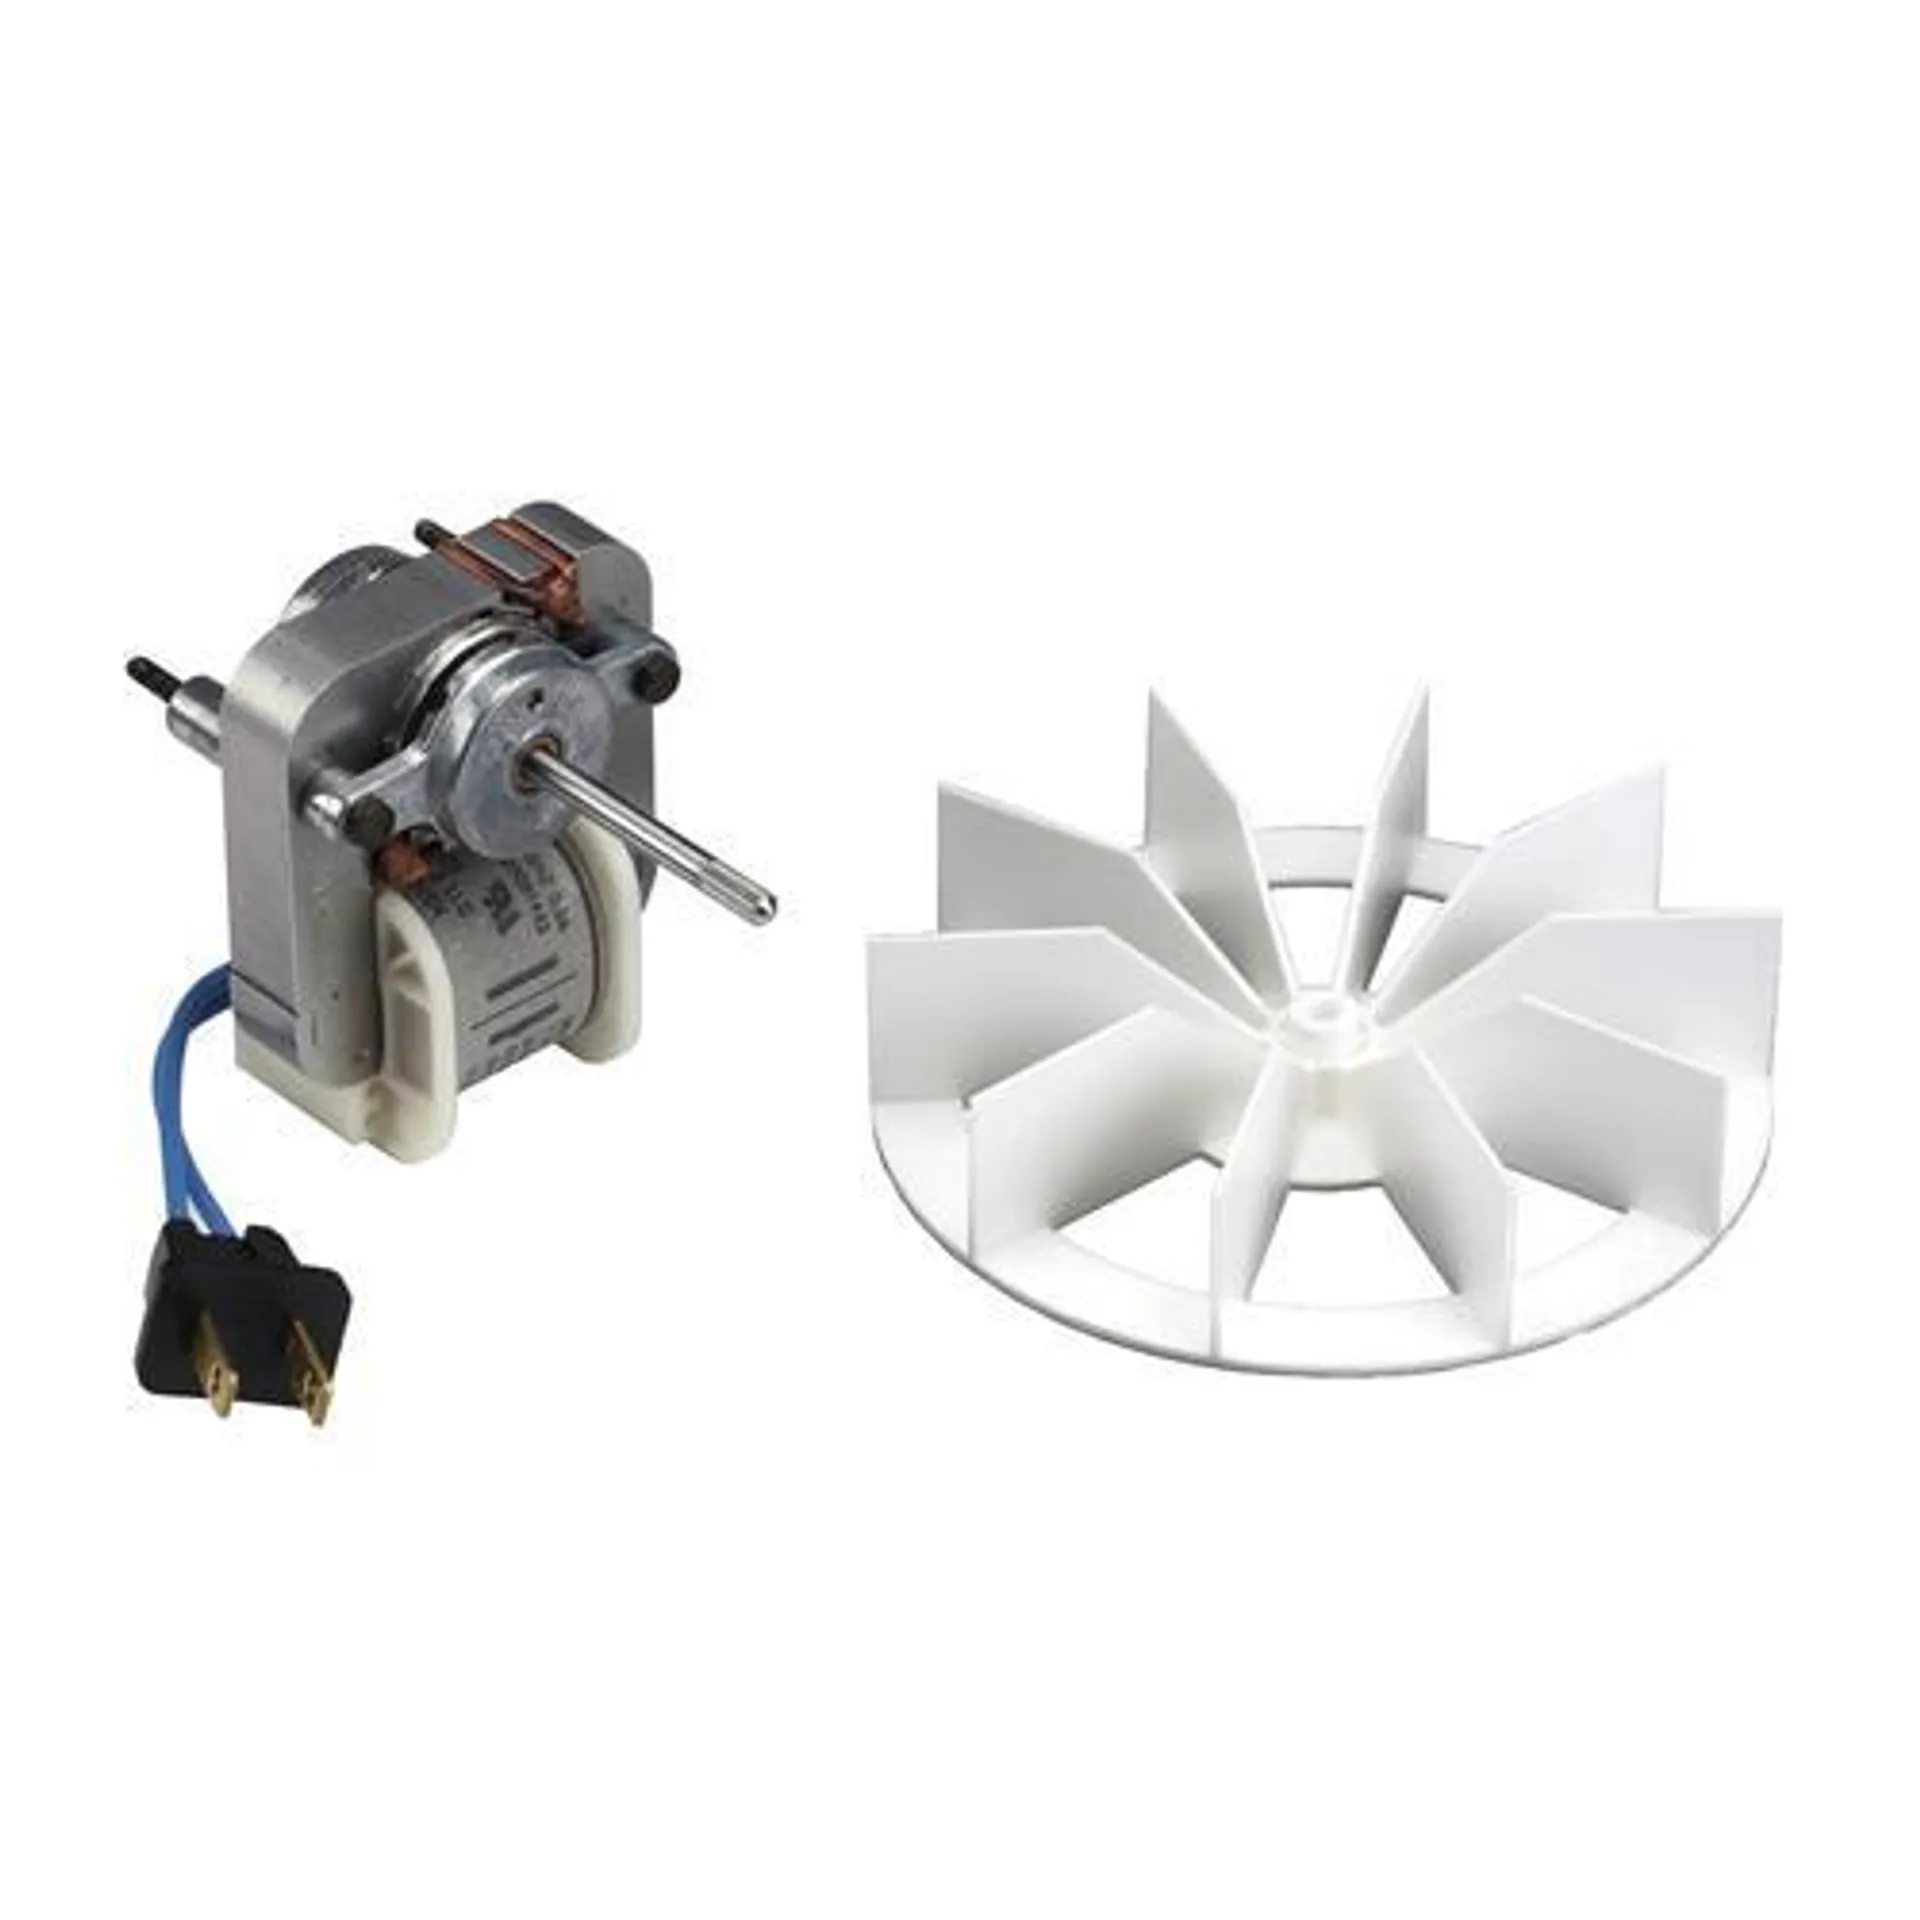 Broan® 50 CFM Replacement Bath Fan Motor and Impeller